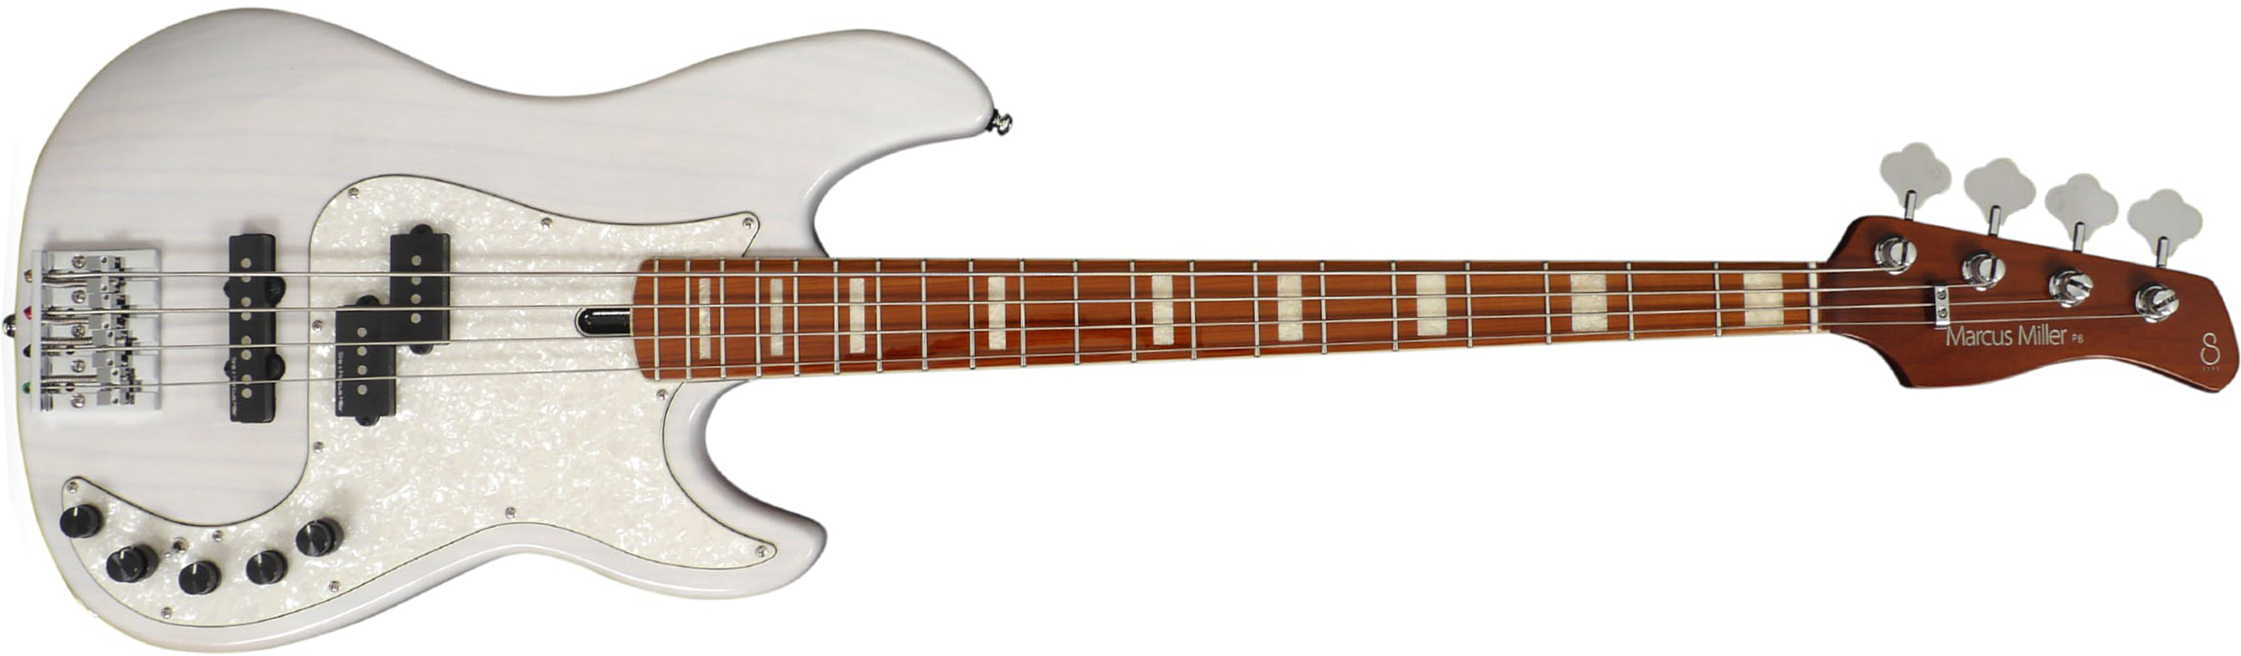 Marcus Miller P8 4st Active Mn - White Blonde - Solidbody E-bass - Main picture